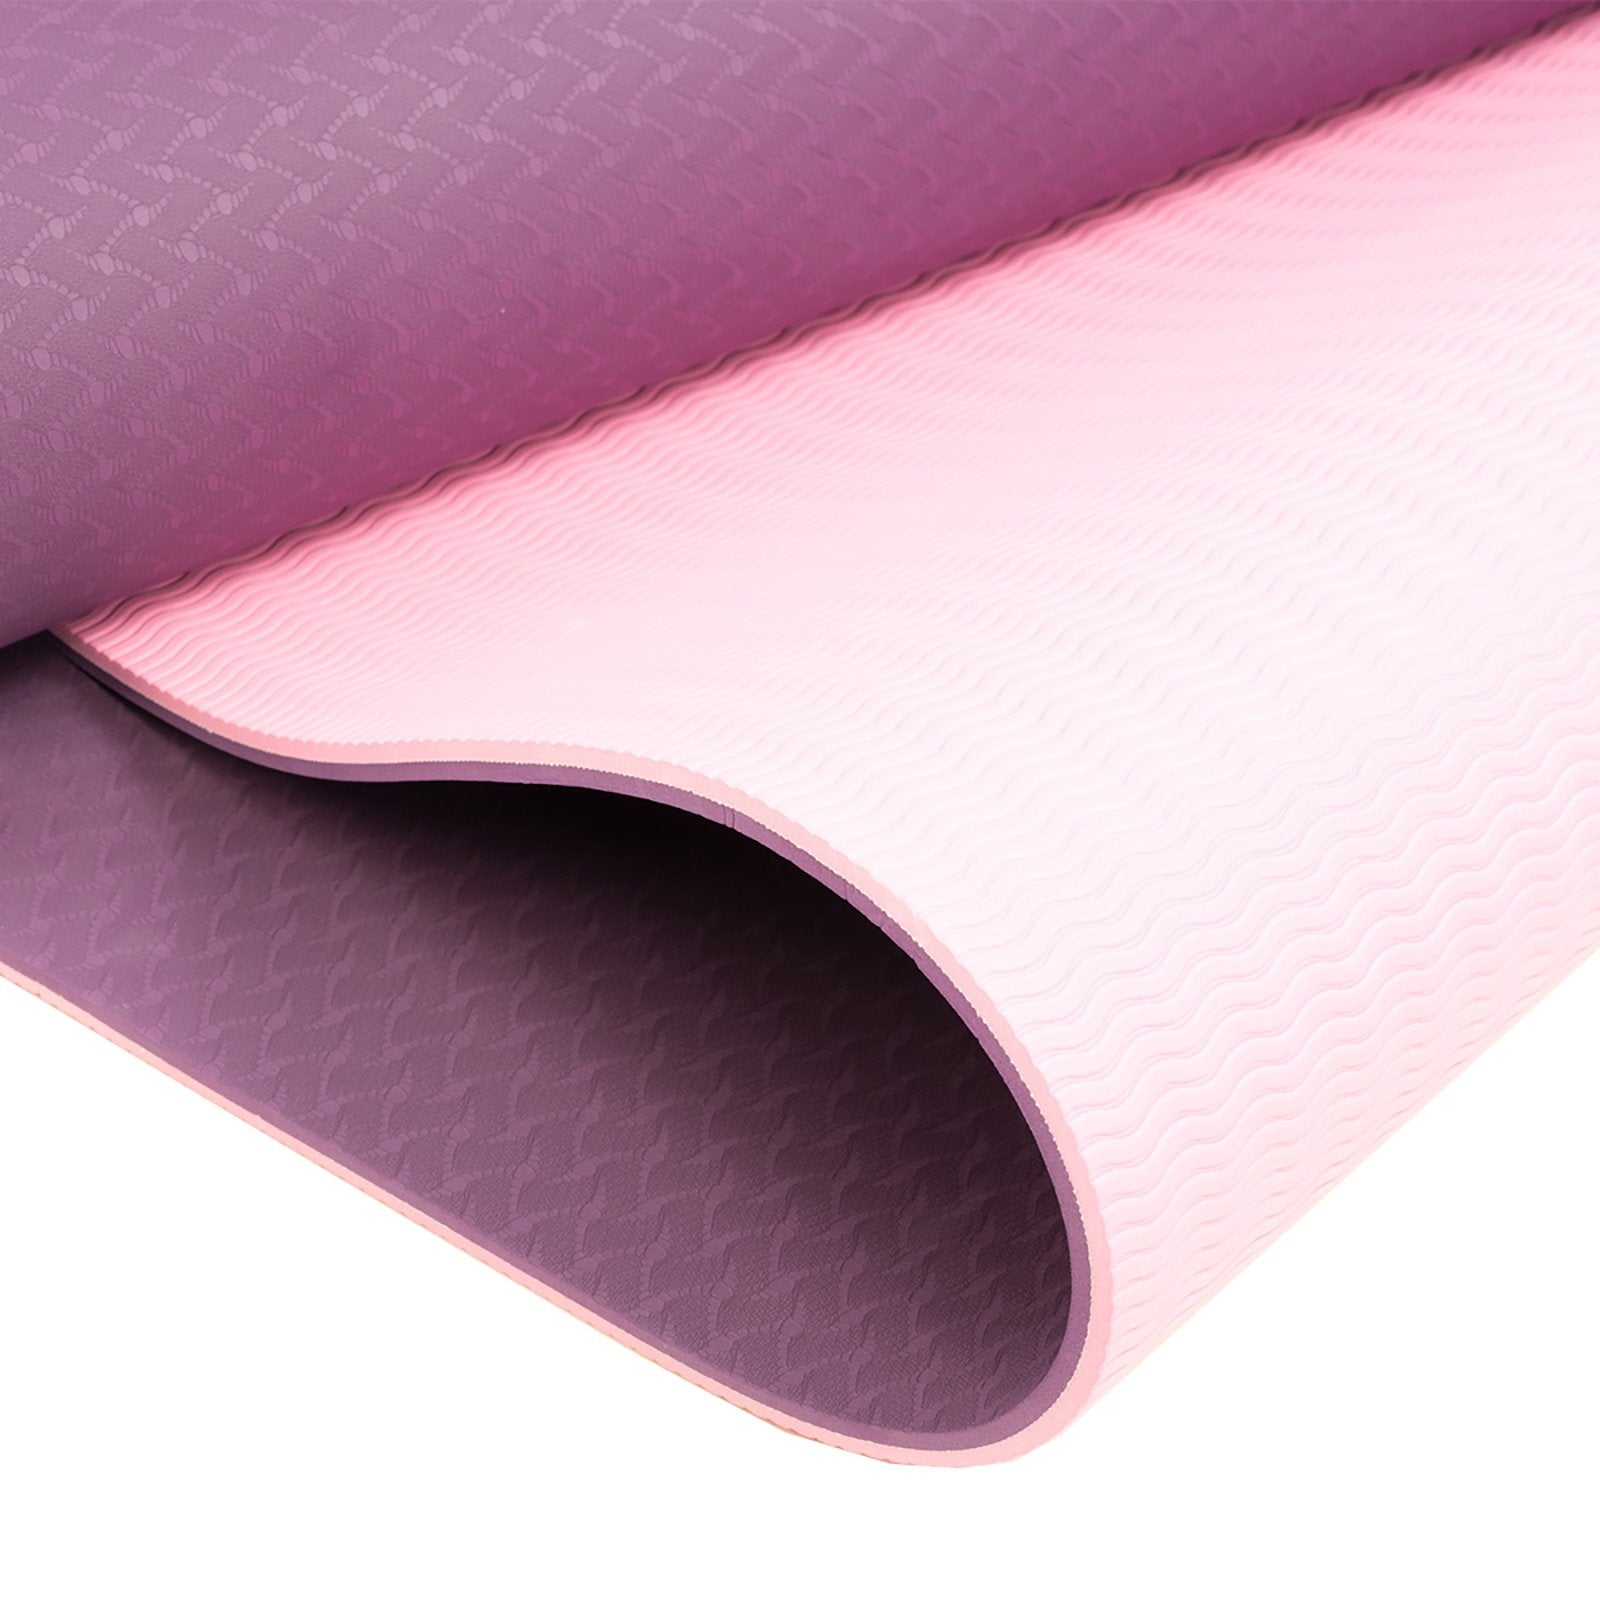 Eco-Friendly Dual Layer 8mm Yoga Mat | Purple | Non-Slip Surface and Carry Strap for Ultimate Comfort and Portability